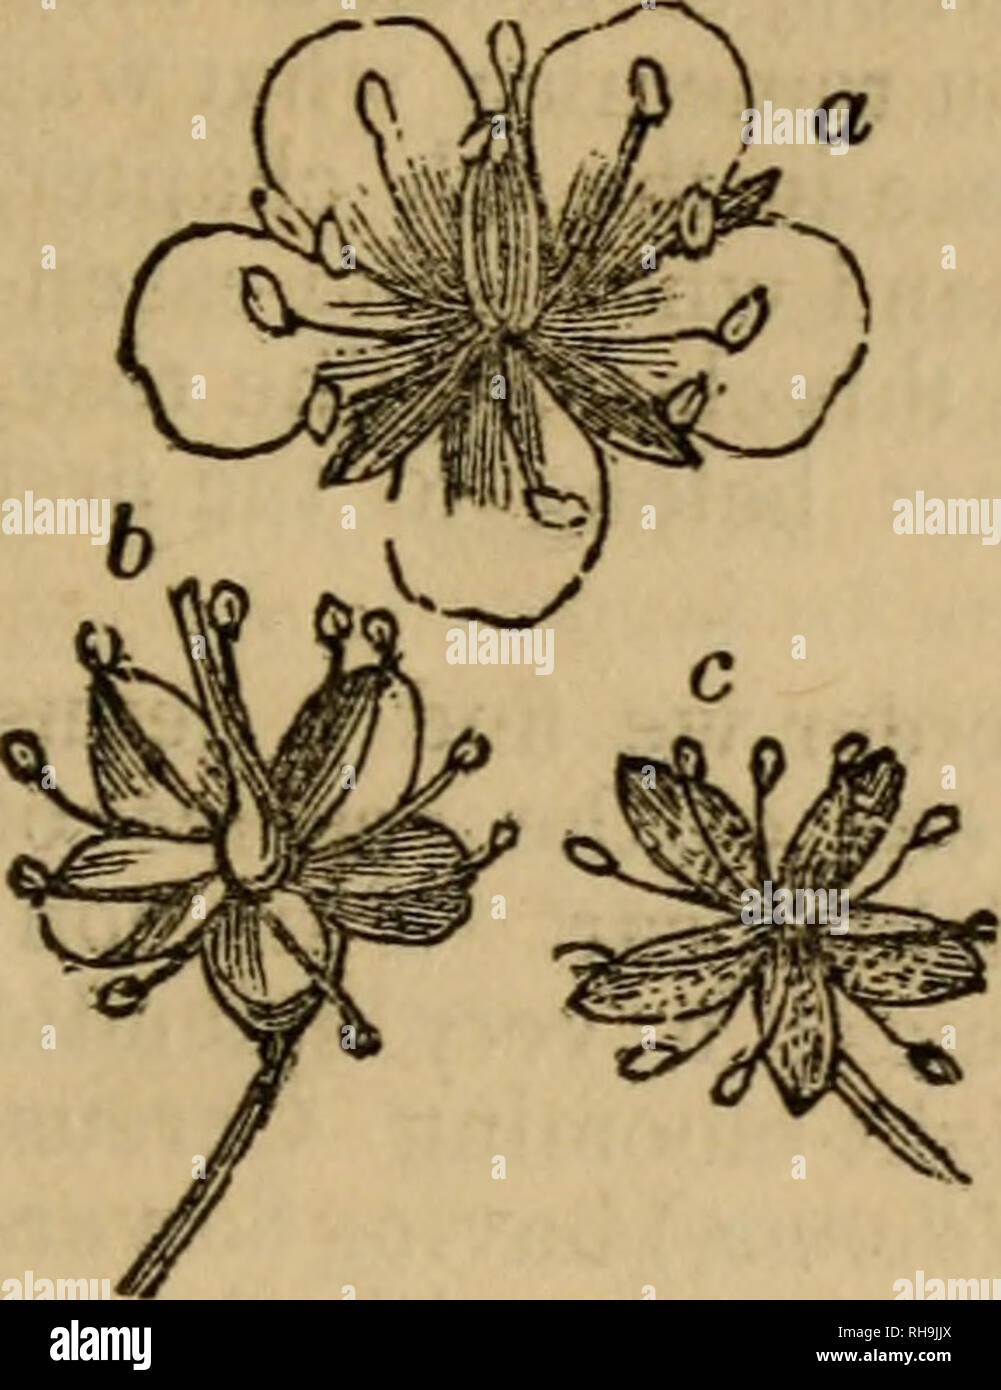 . Botany for beginners: an introduction to Mrs. Lincoln's Lectures on botany. Plants. Ch. XXIII.] CLASSES AND ORDERS. 137 Class X. Decandria, tpn stamens Order 1. Monogynia, one pistil. Fig. 81. 579. This cut represents at a, a flow- er of the genus Buta, (rue;) its calyx is monosepalous ; it has five petals; the germ is large and superior. At 6 is a flower of the Saxifraga ; one species of this, sometimes called beef-steak geranium, is a very common and hardy green-house plant, with creeping roots and roundish hairy leaves. At c is a flower of the genus Ledum ; this corresponds with the Saxif Stock Photo